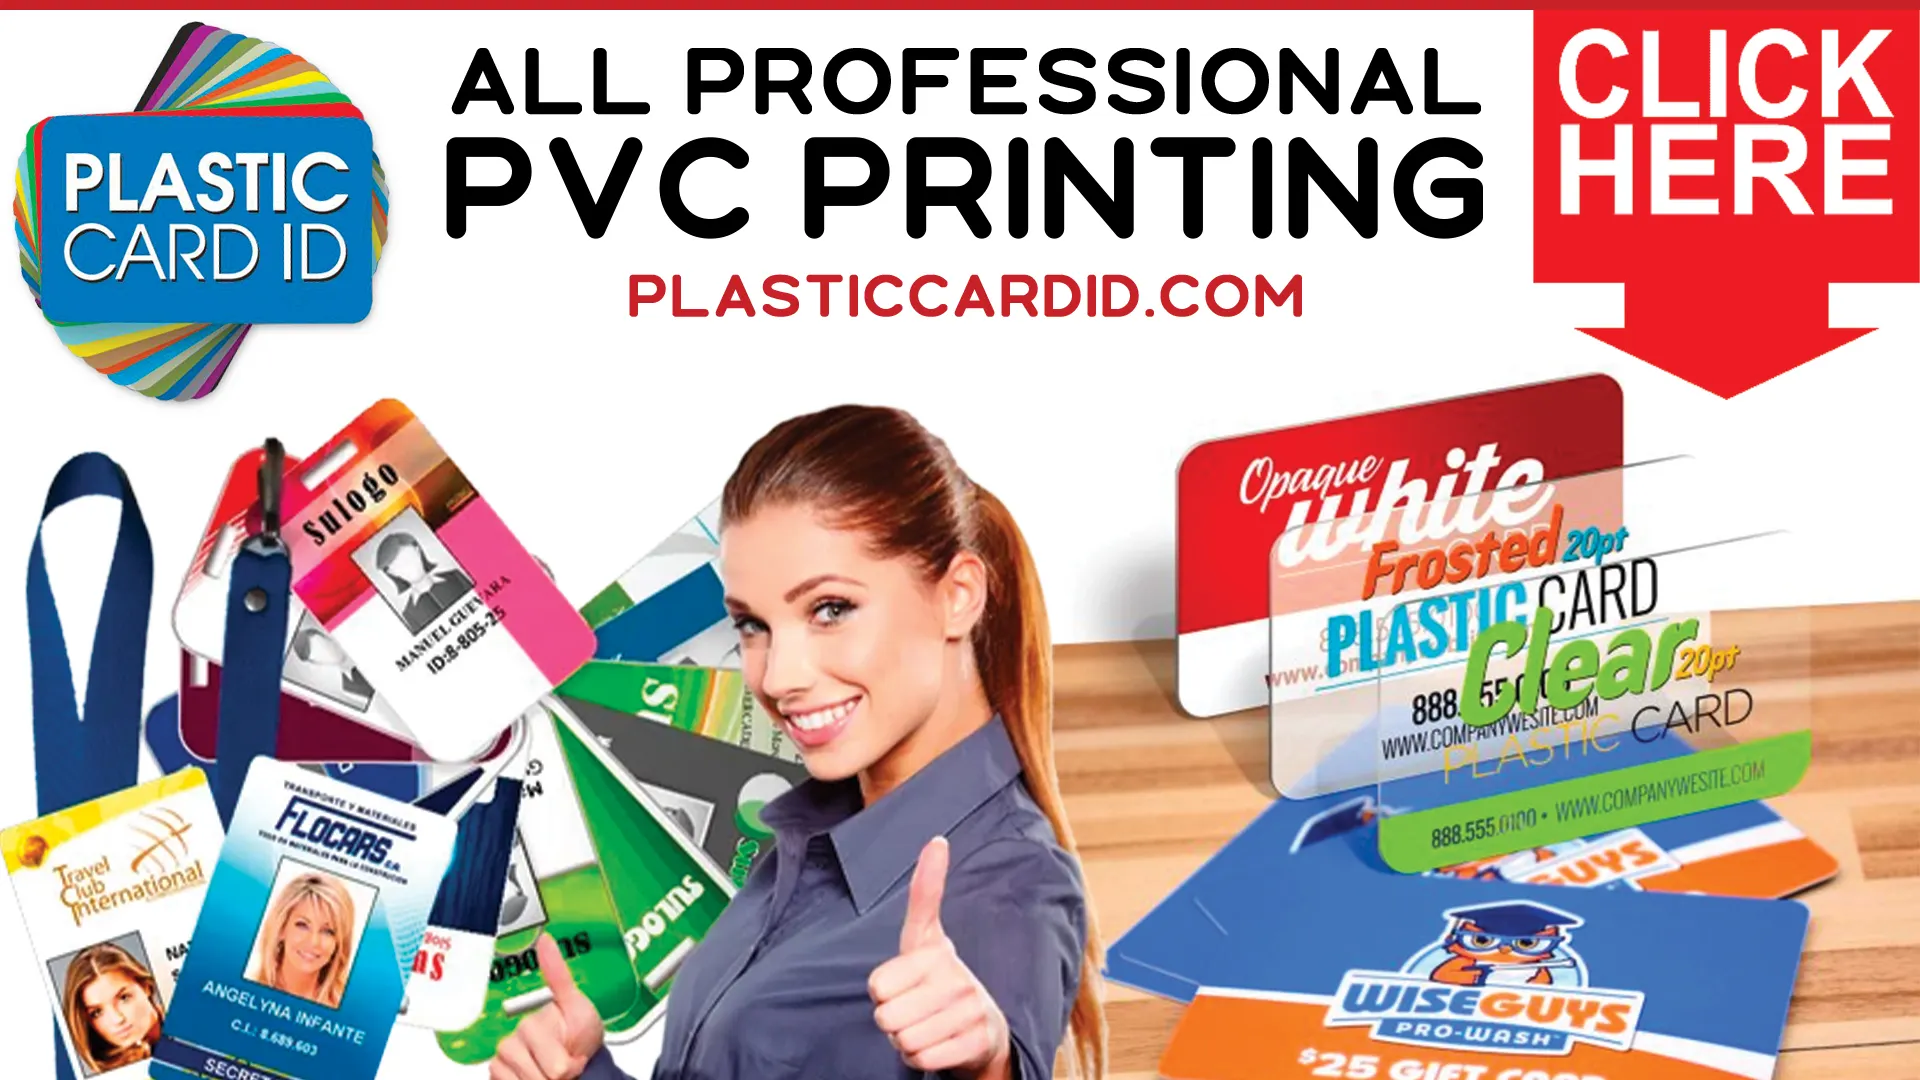 Welcome to Plastic Card ID




, Your Premier Plastic Card Printing Partner